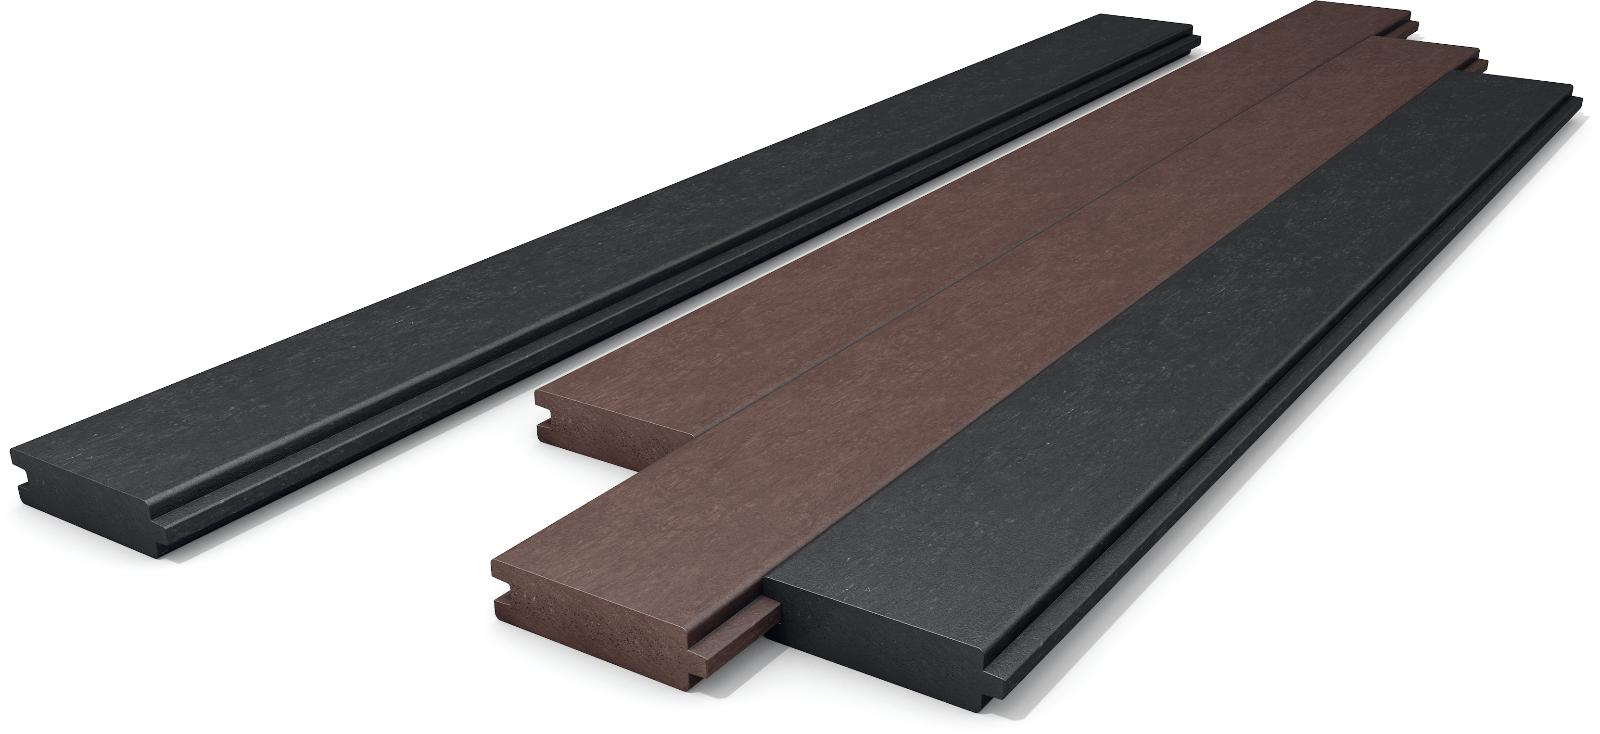 hanit® ULTRA Board profile | with tongue & groove